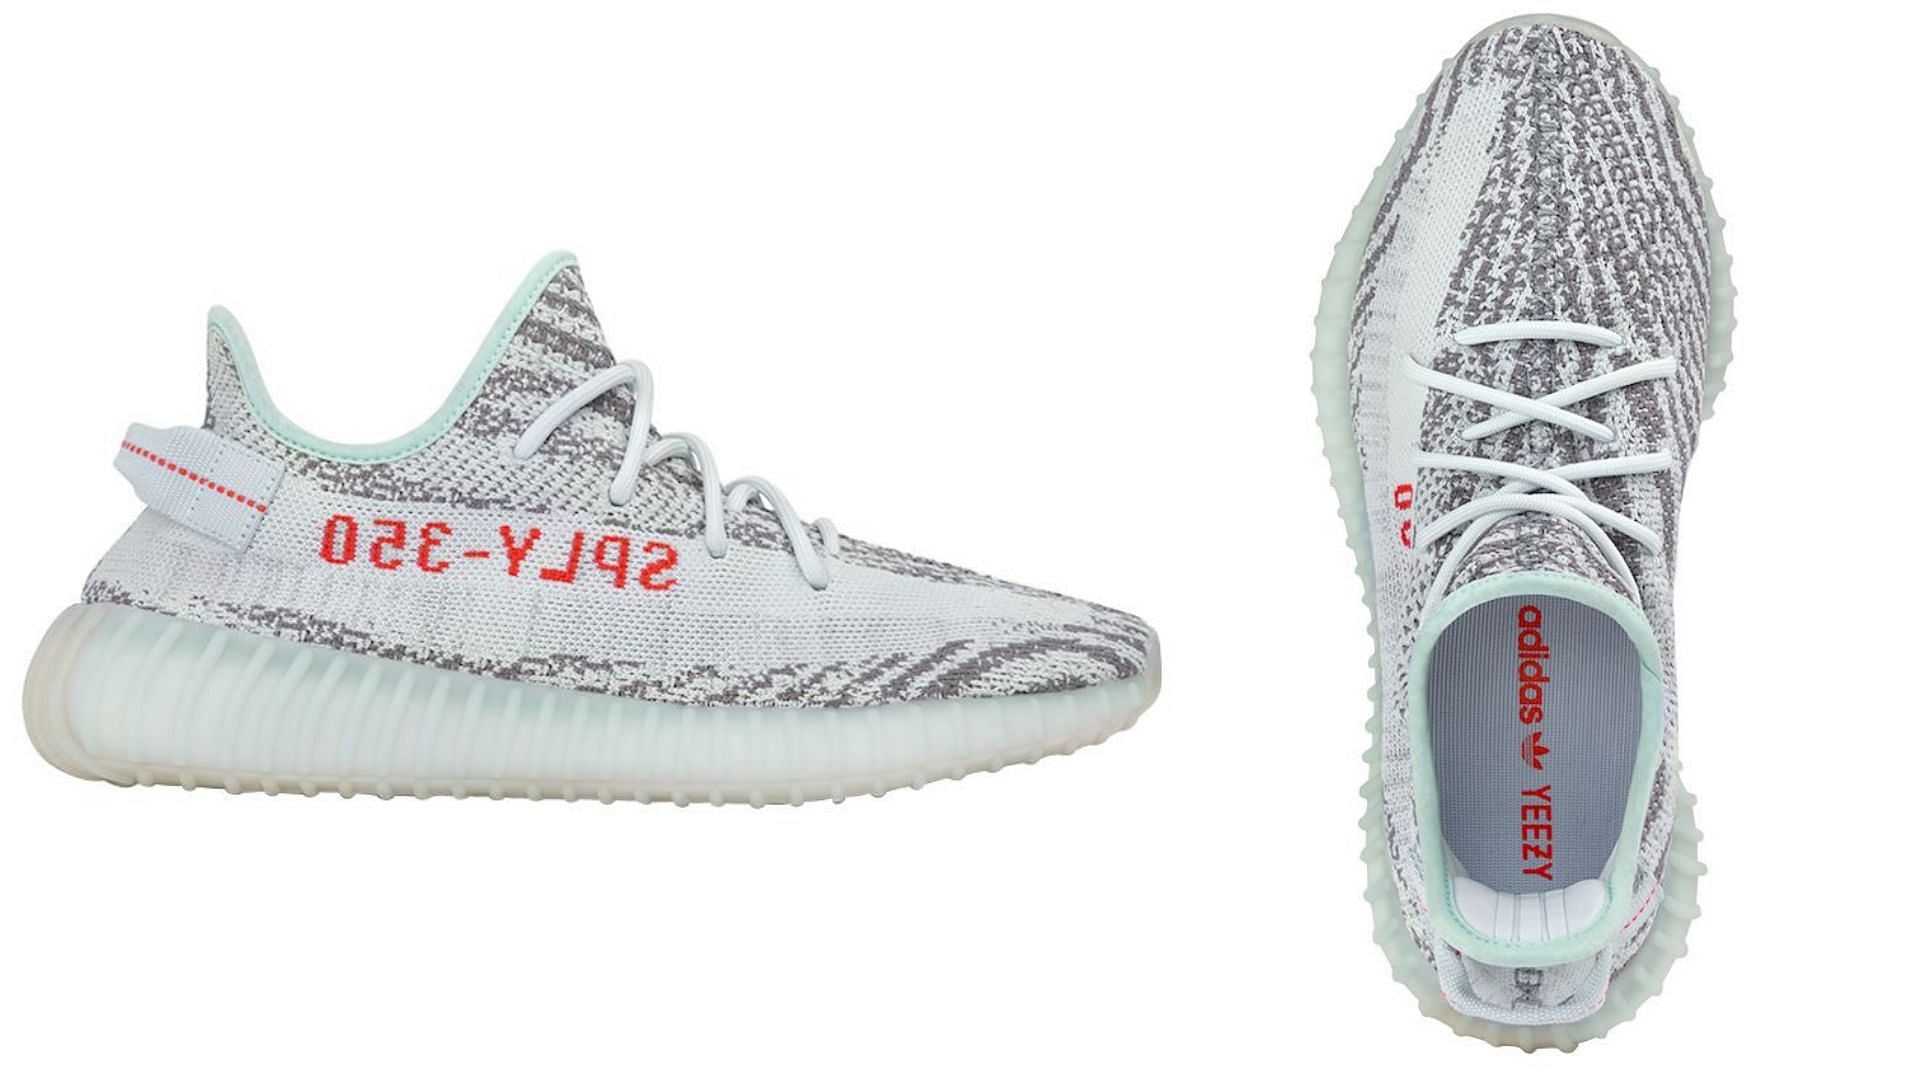 A closer look at the Blue Tint colorway (Image via Adidas Yeezy)